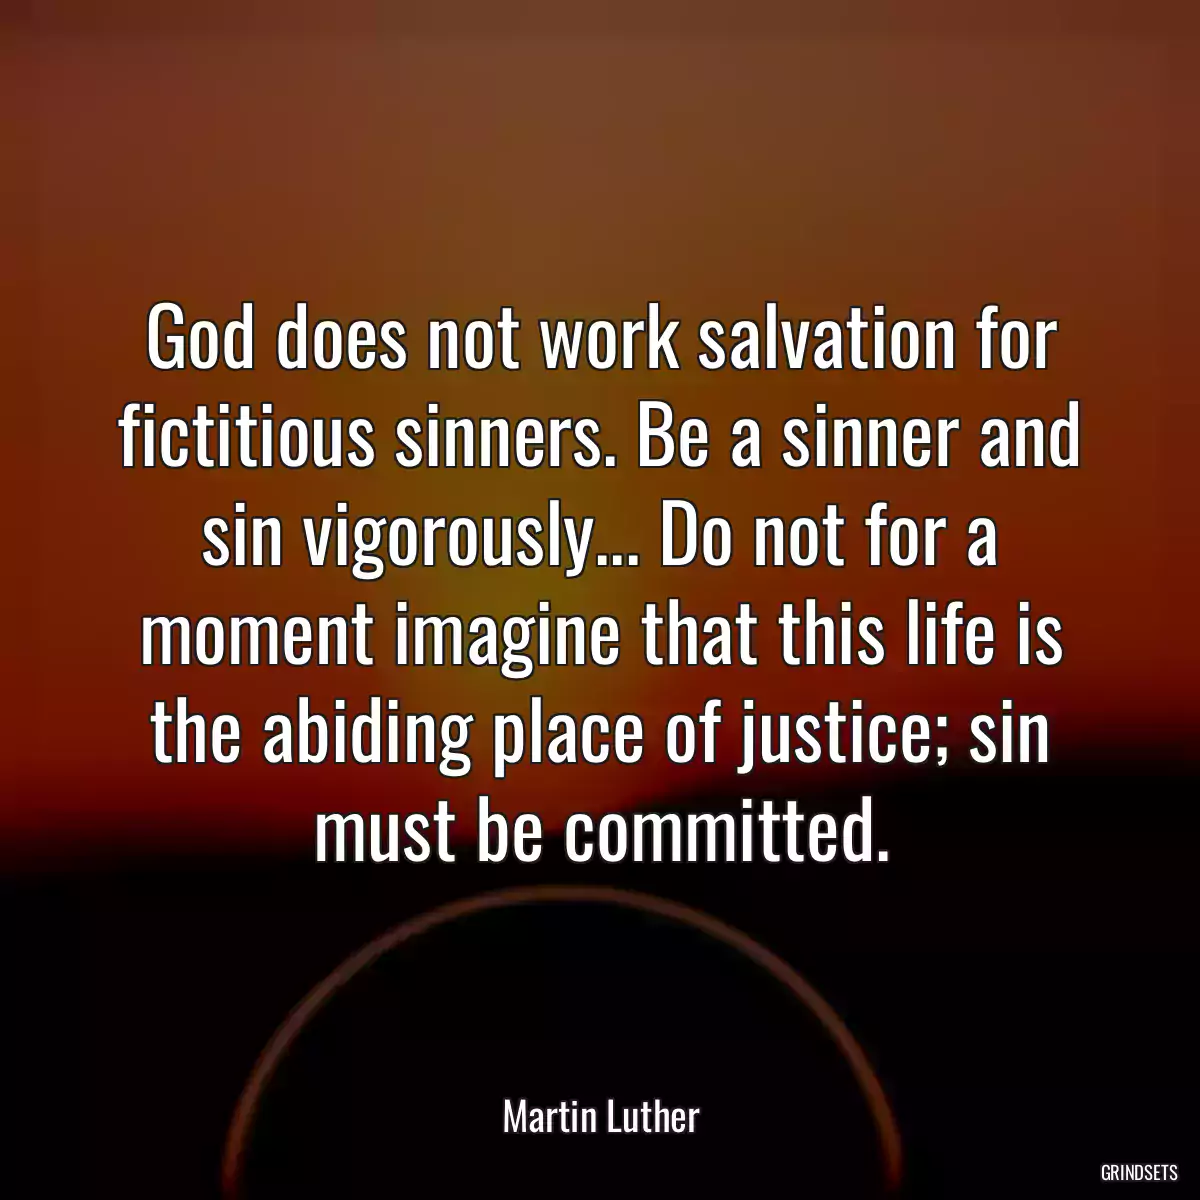 God does not work salvation for fictitious sinners. Be a sinner and sin vigorously... Do not for a moment imagine that this life is the abiding place of justice; sin must be committed.